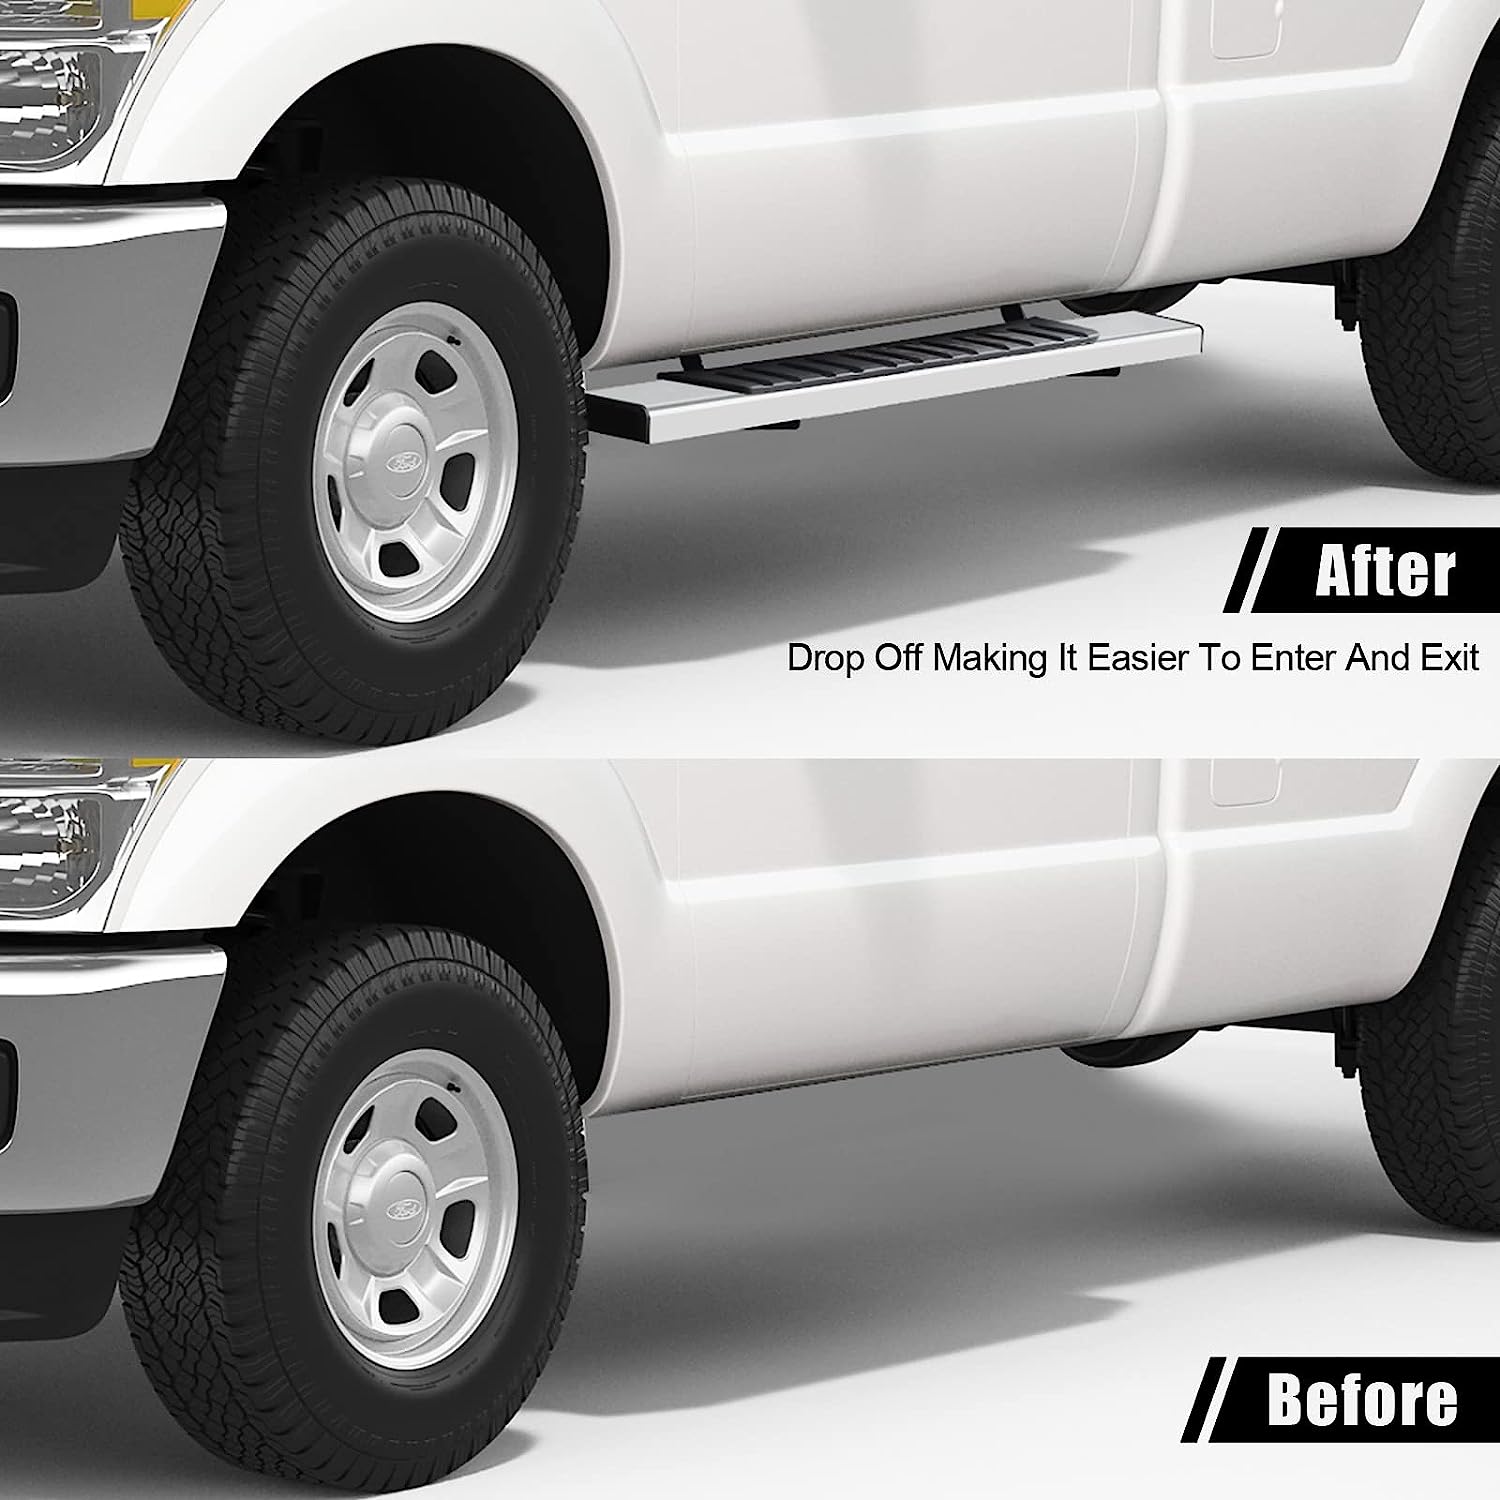 Running Boards Compatible with 2007-2018 Chevy Silverado/Gmc Sierra 1500, 2007-2019 2500/3500 Regular/Standard/Single Cab, Stainless Steel Side Steps H6 Style. - COMNOVA AUTOPART